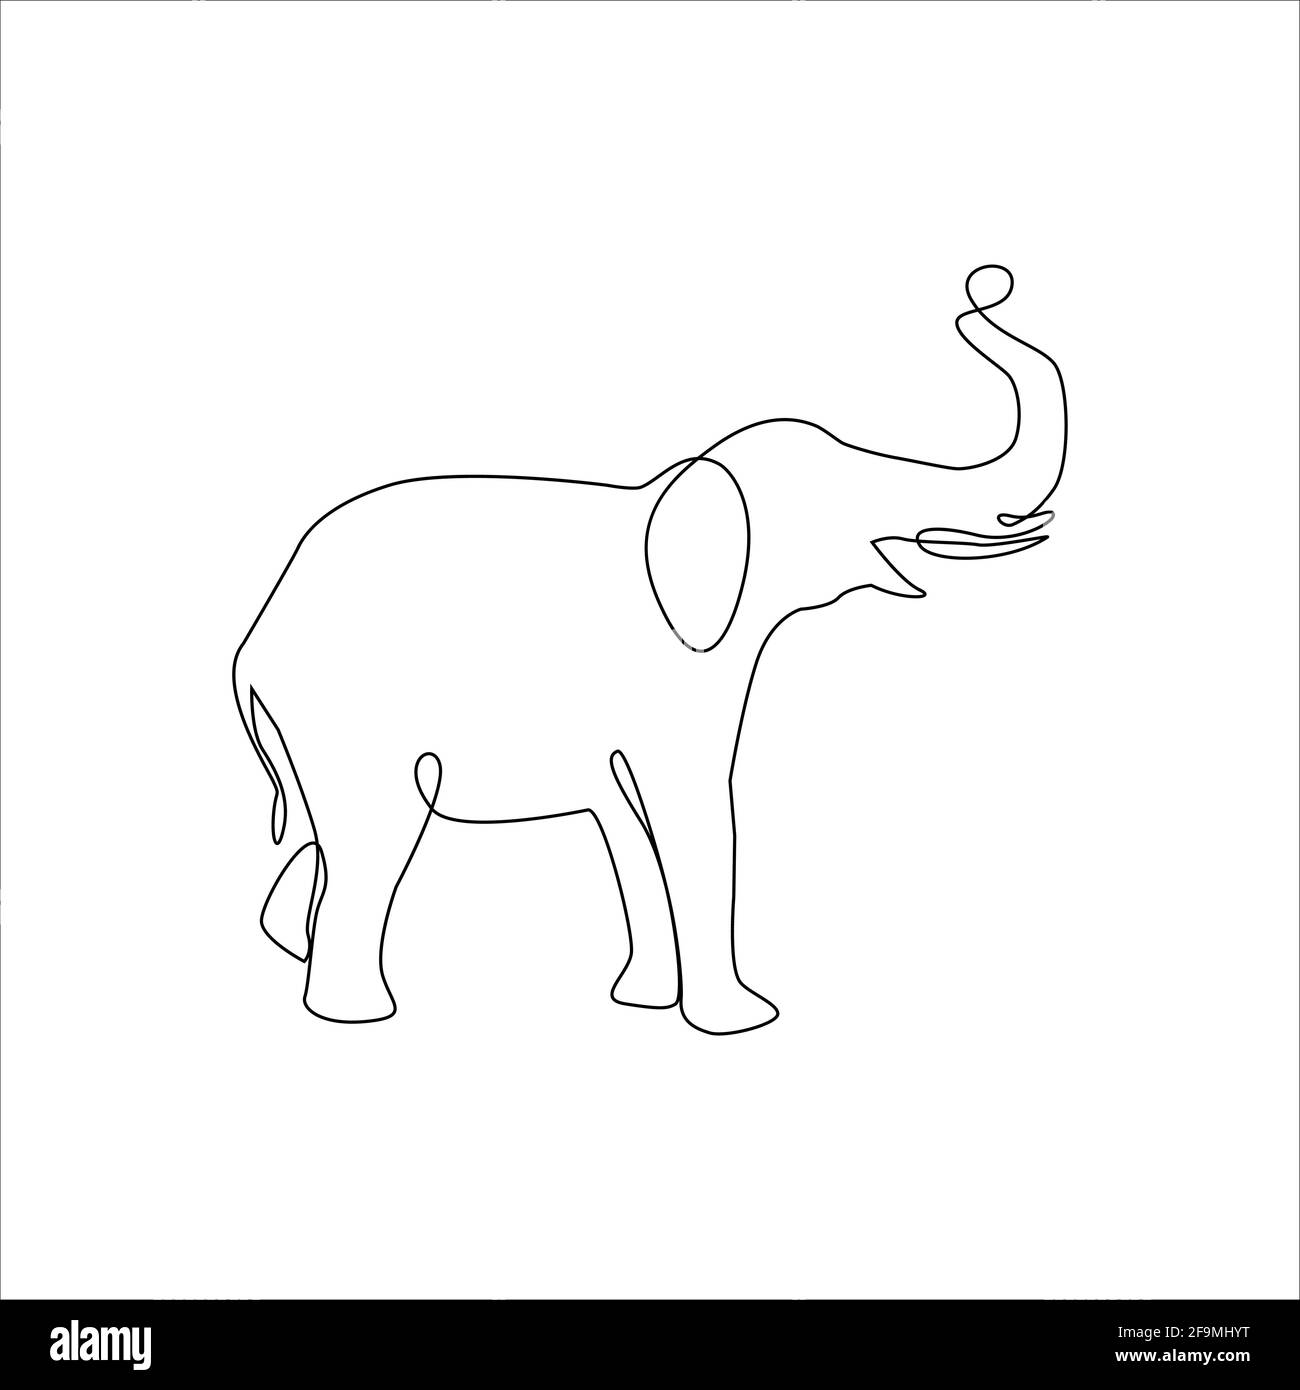 Minimalist One Line Elephant Icon. Elephant one line hand drawing continuous art print, Vector Illustration. Free single line drawing of elephant. Lin Stock Vector